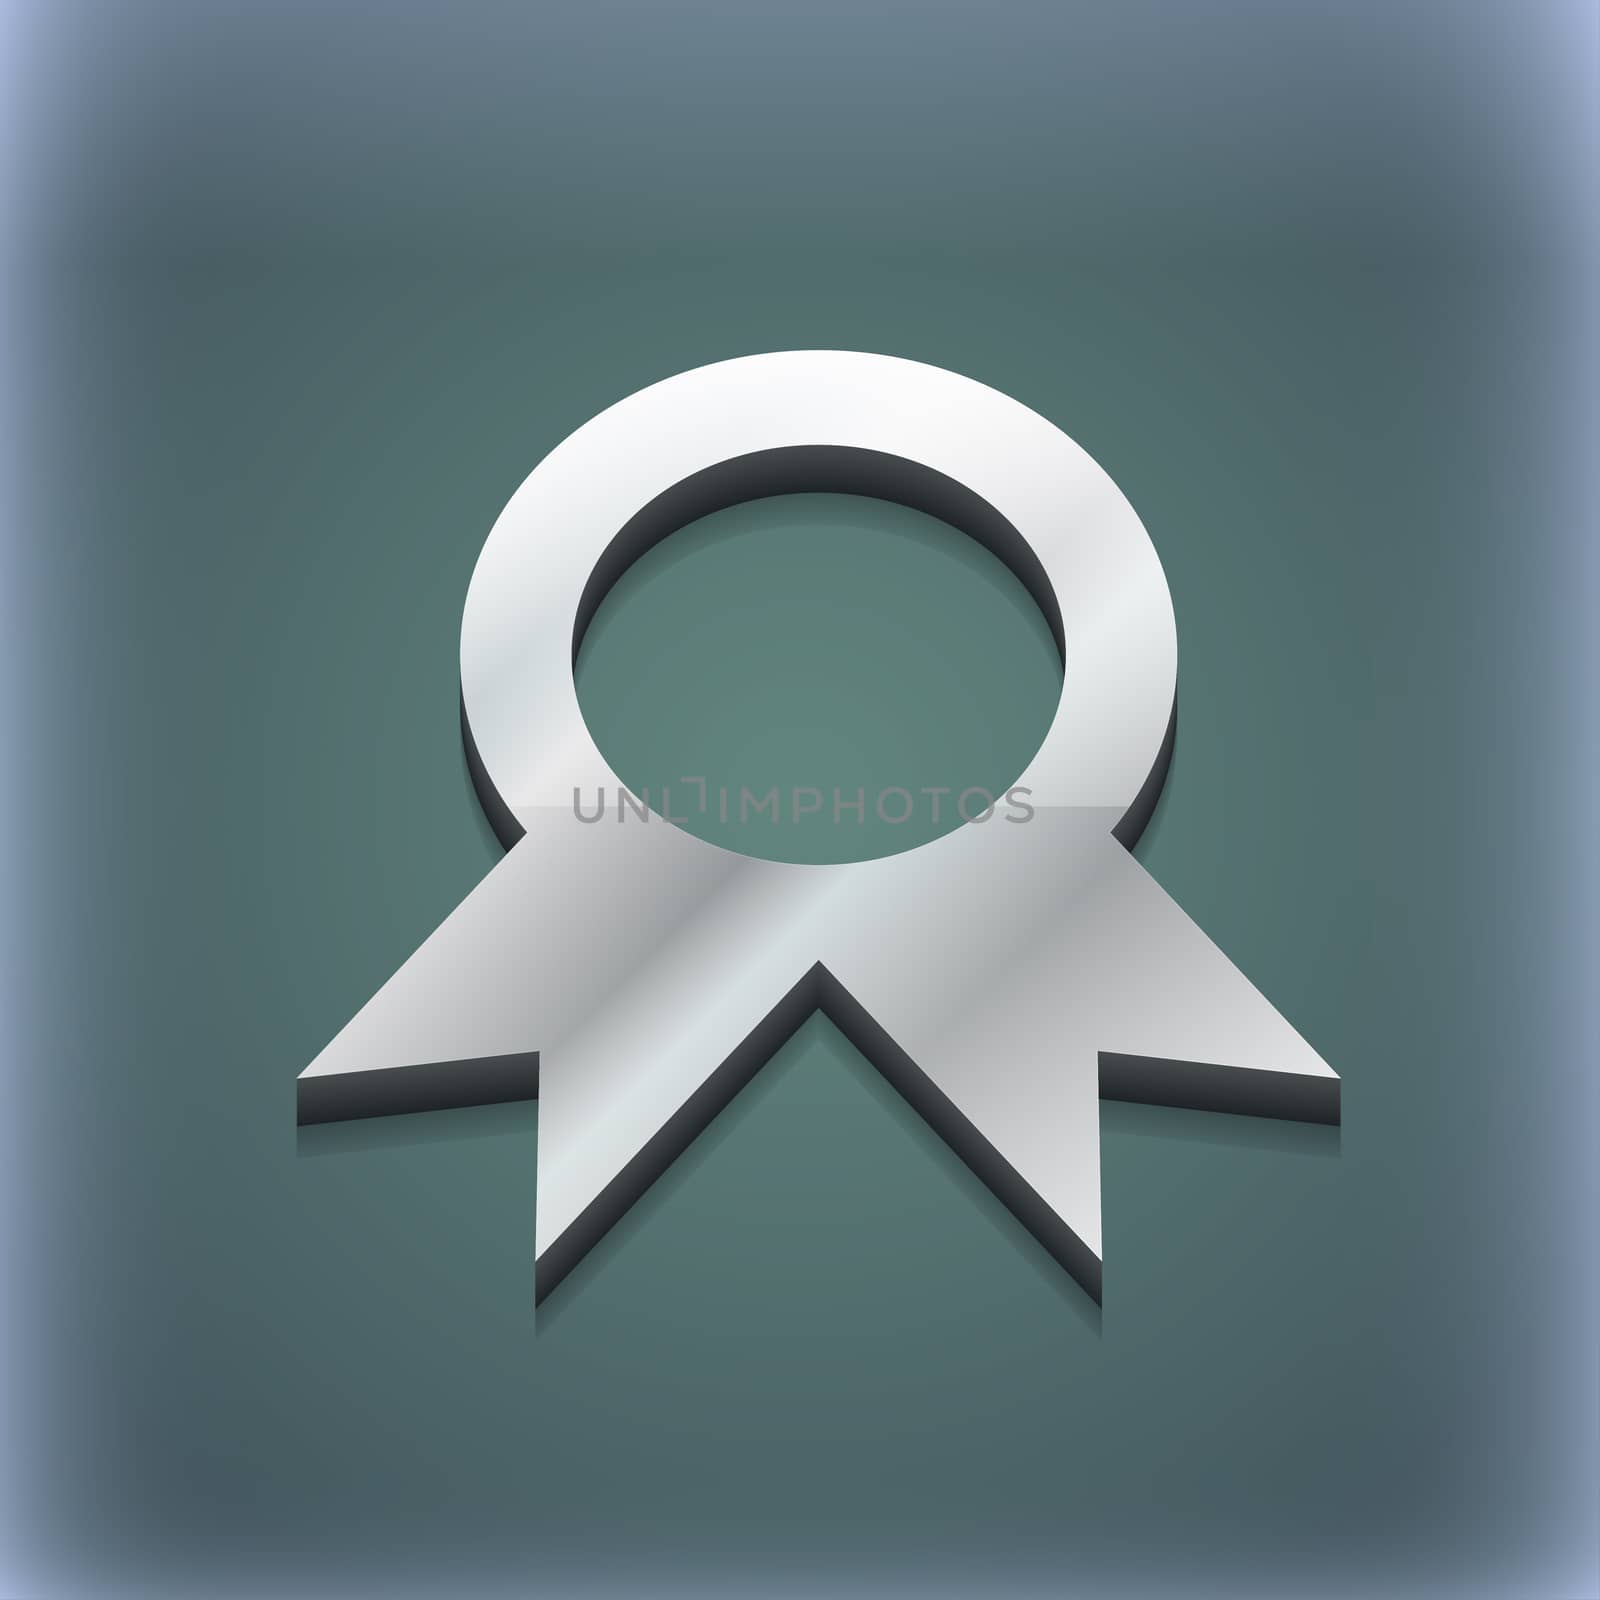 Award, Prize for winner icon symbol. 3D style. Trendy, modern design with space for your text illustration. Raster version